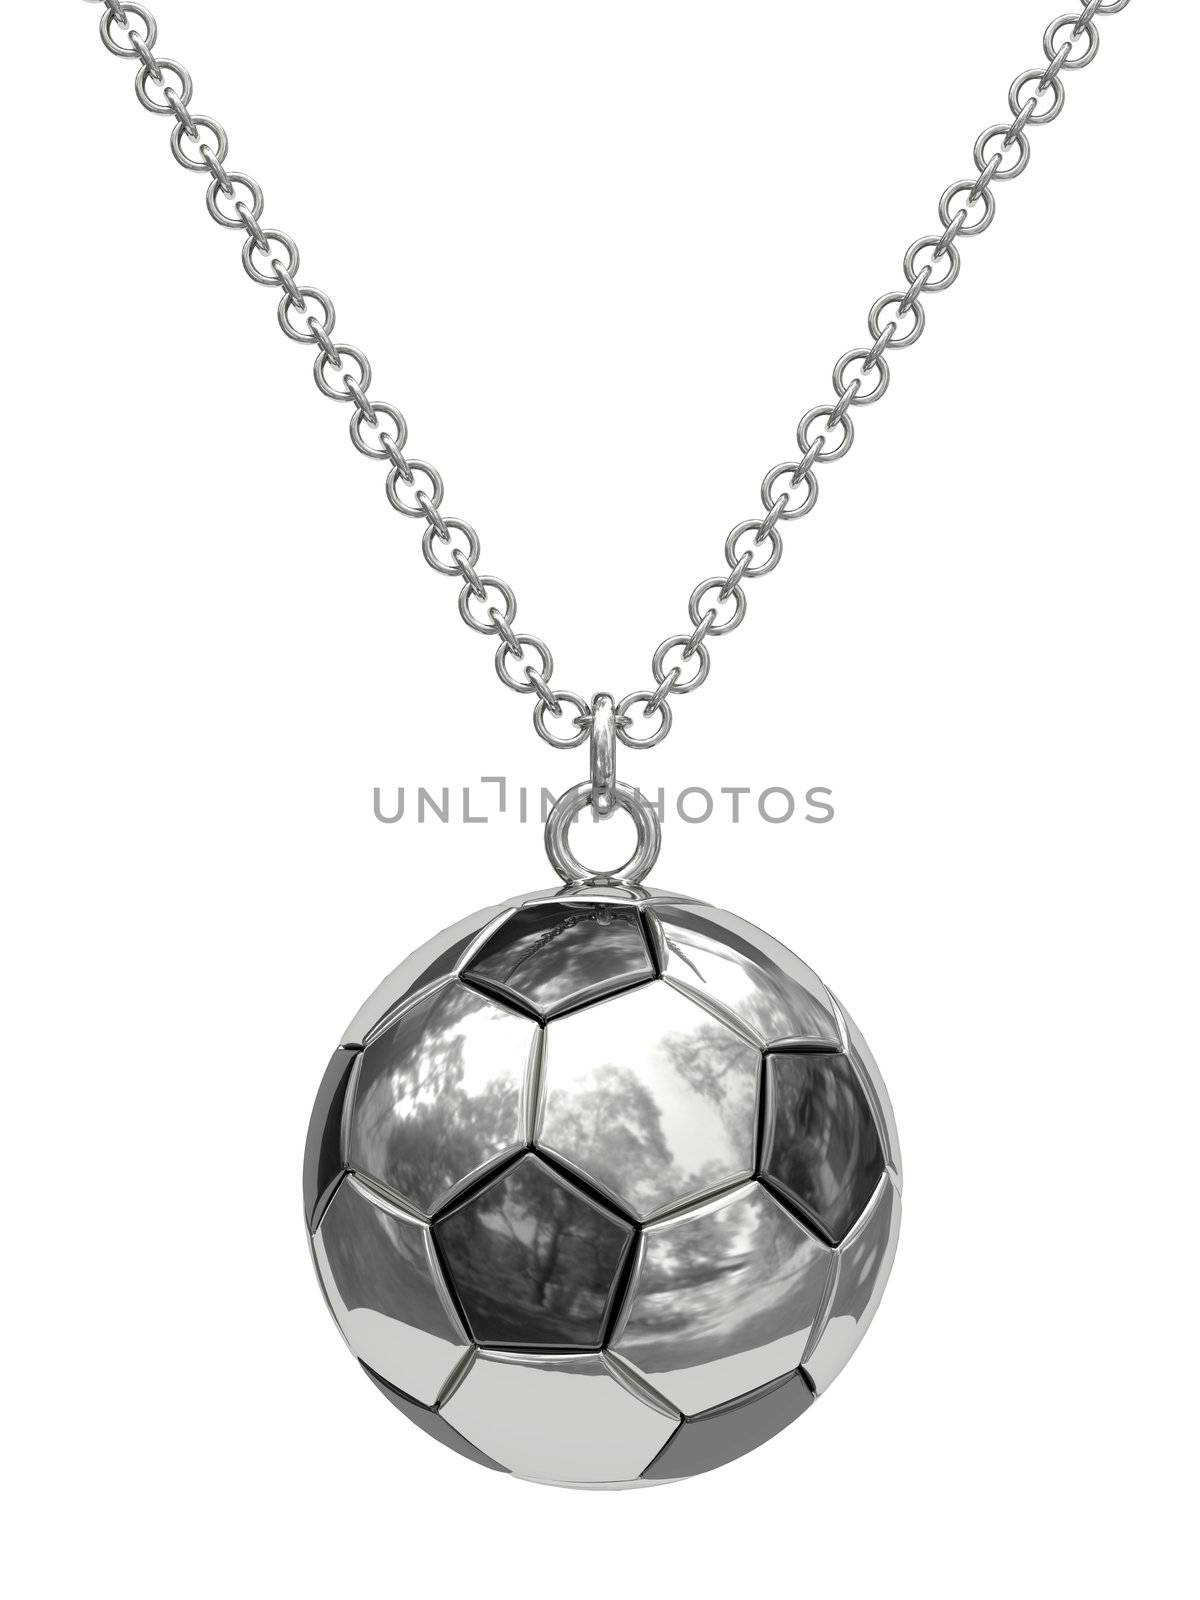 Silver pendant in shape of soccer ball on chain by oneo